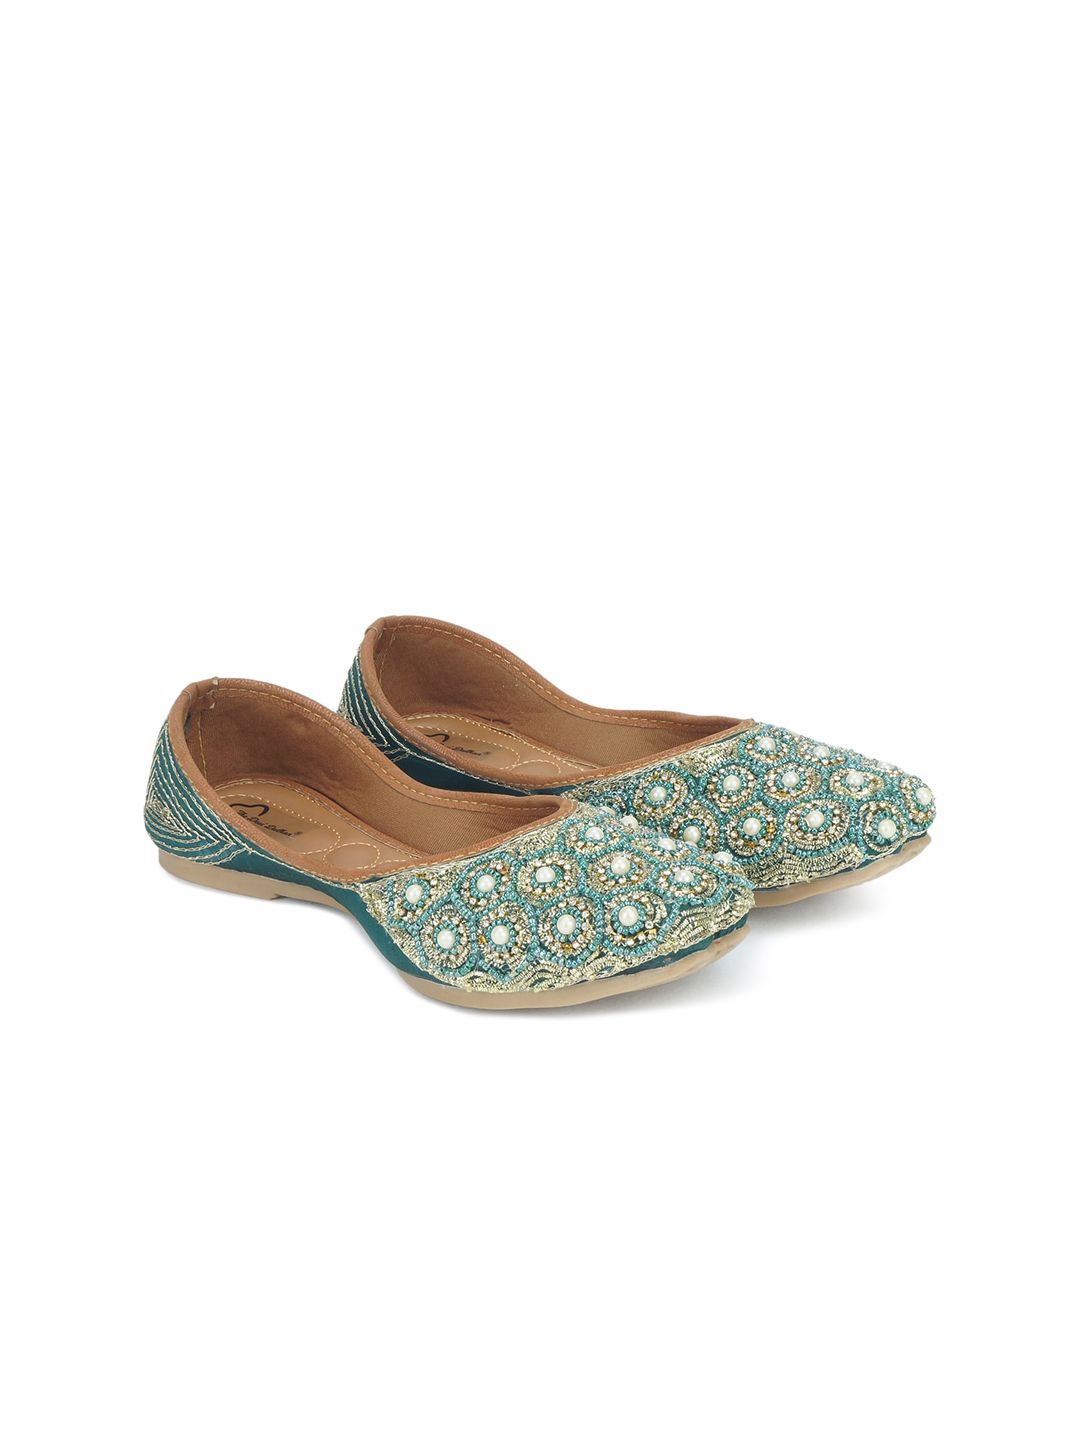 The Desi Dulhan Women Green Printed Leather Party Mojaris Flats Price in India